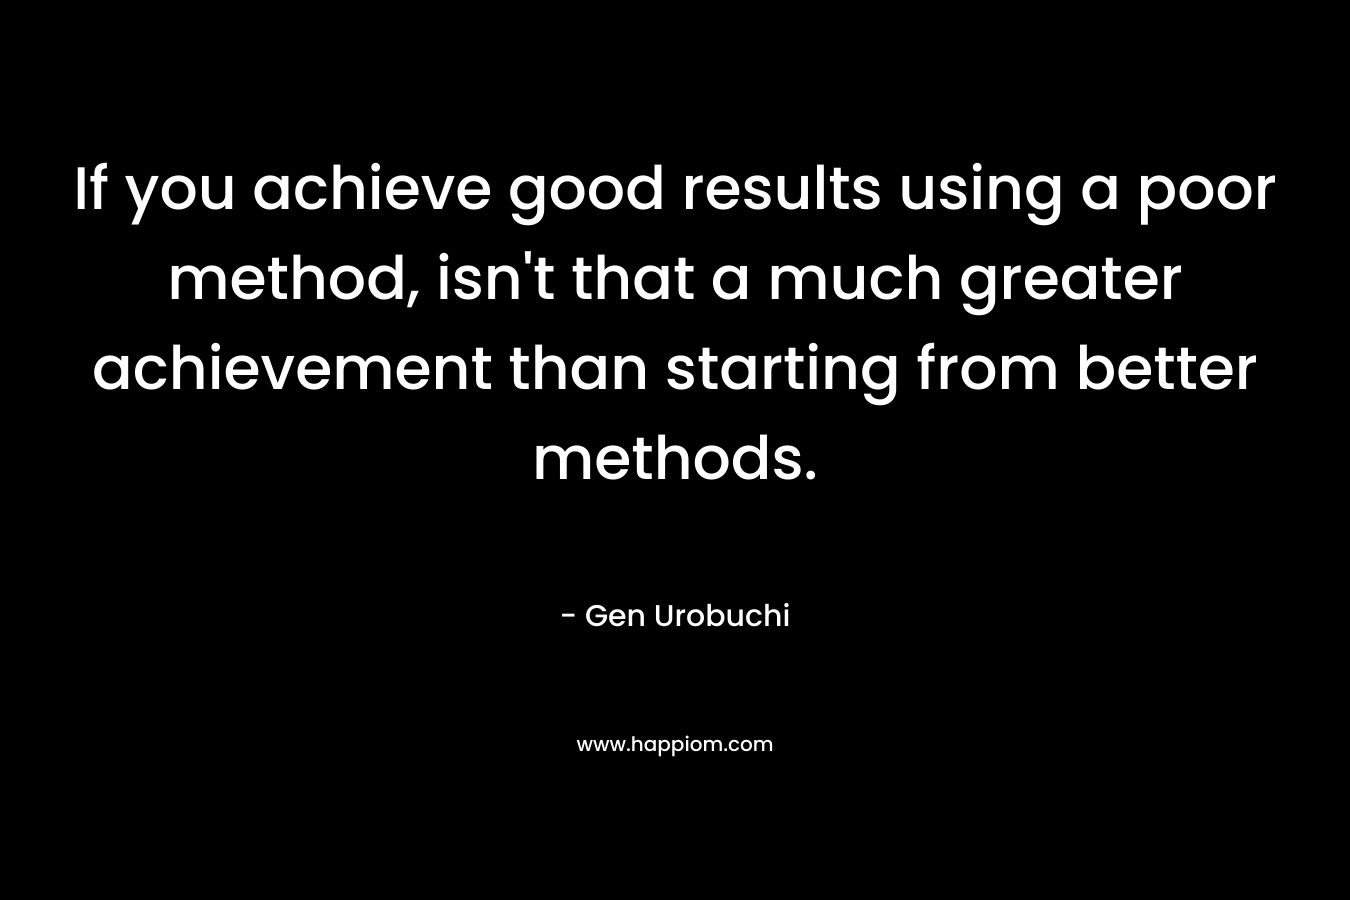 If you achieve good results using a poor method, isn't that a much greater achievement than starting from better methods.